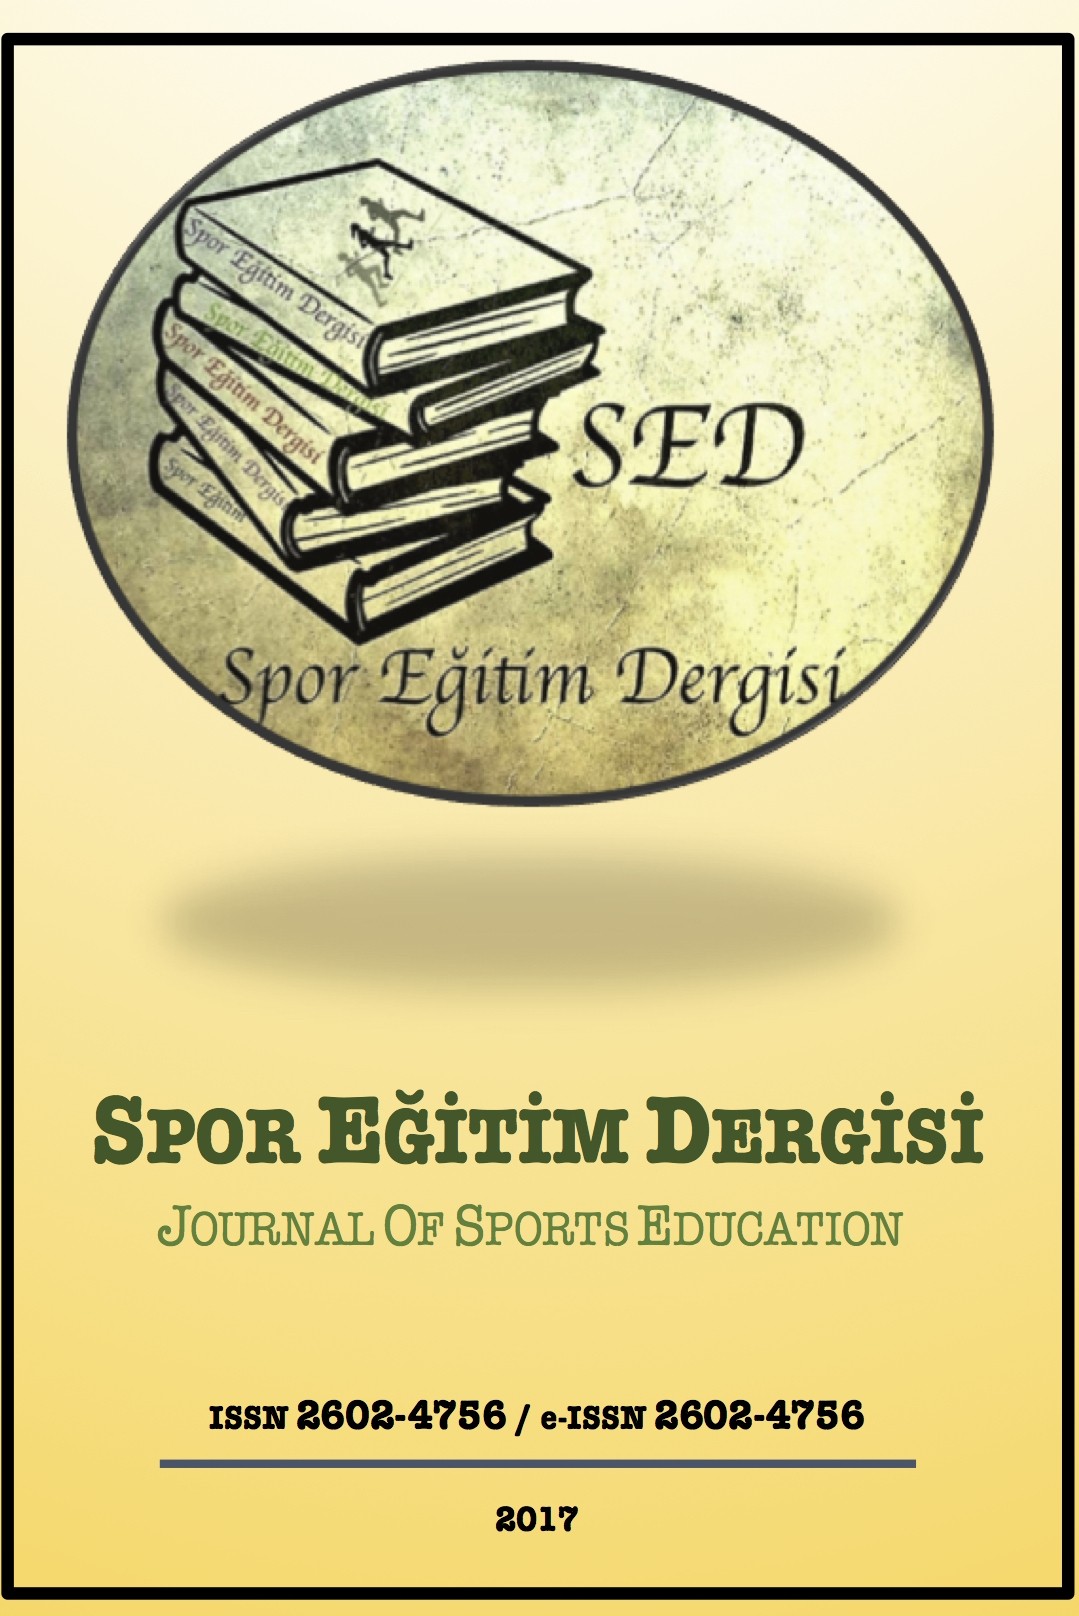 Journal of Sports Education